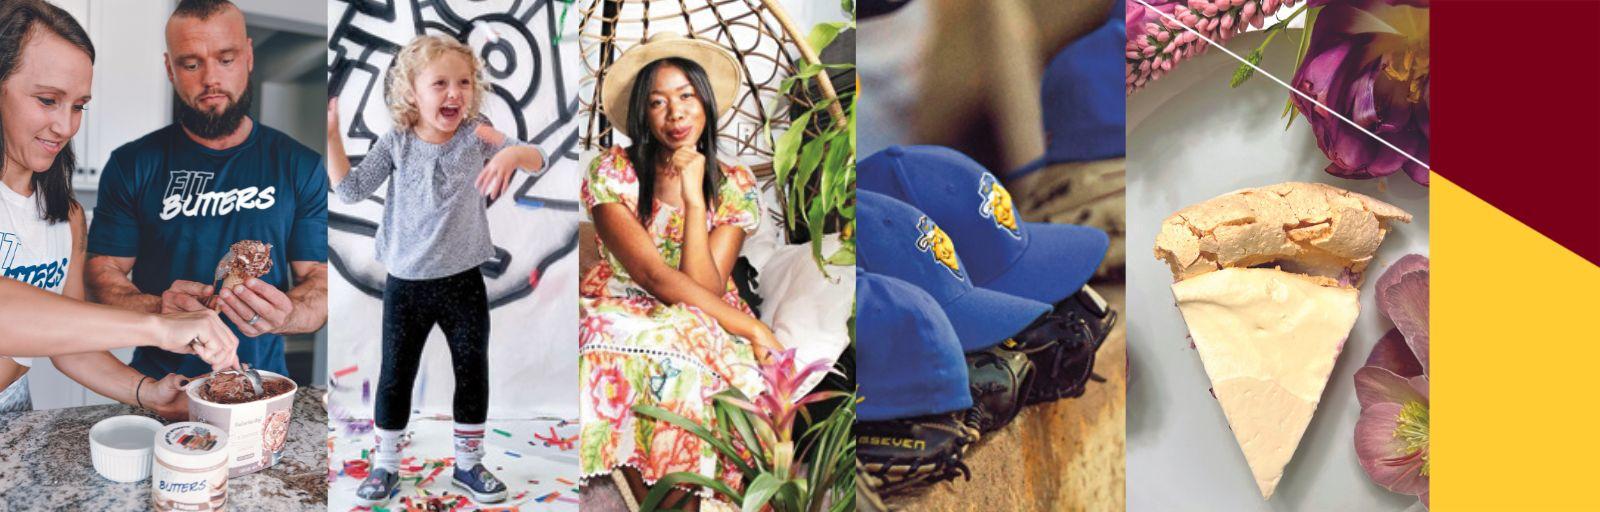 A series of photos spliced together starting with two people scooping out Fit Butter, a toddler playing in confetti, a woman posing near plants, a row of baseball caps, and a piece of pie.